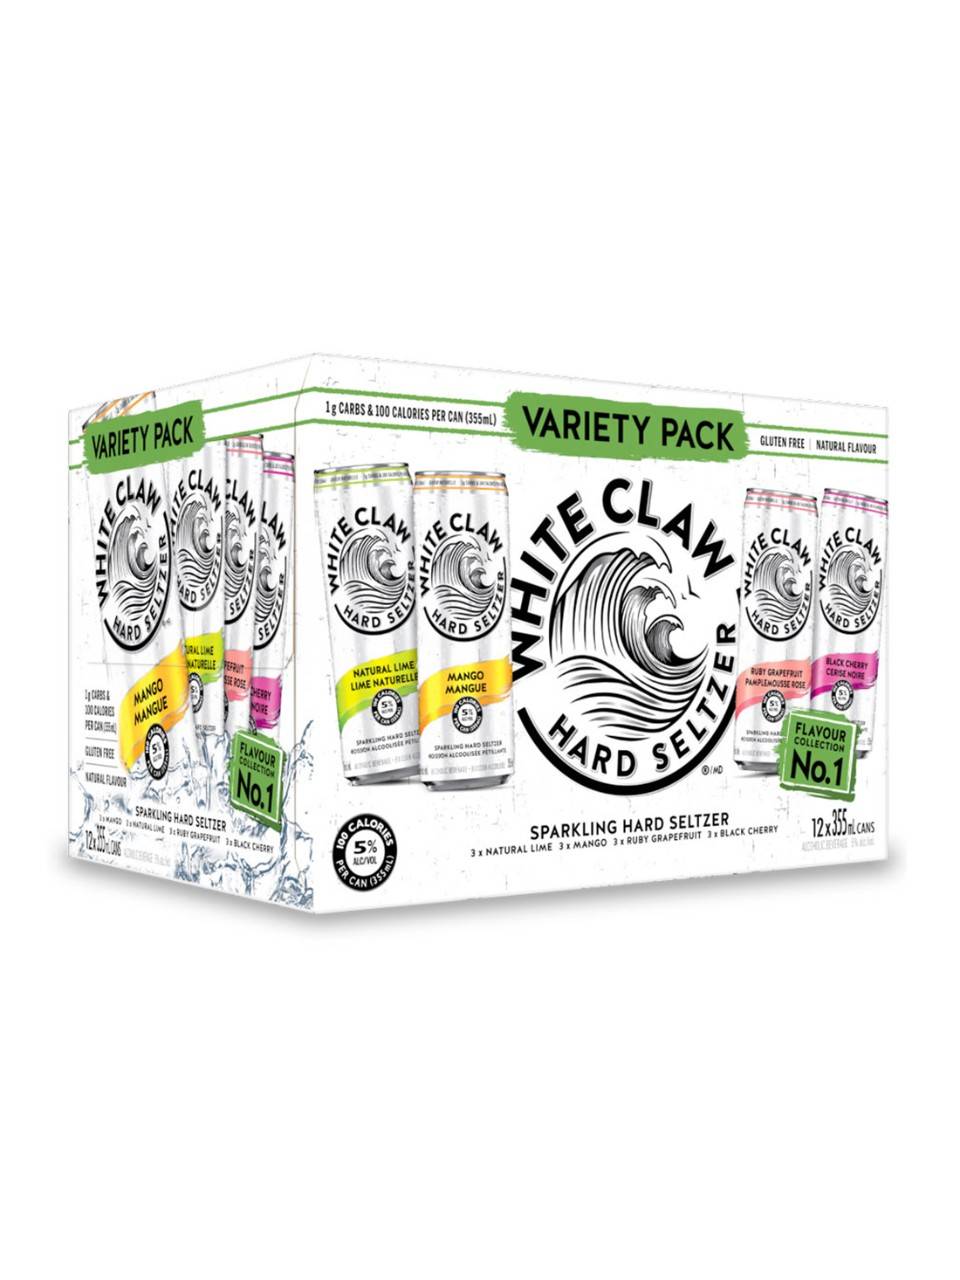 White Claw Sparkling Hard Seltzer (12 pack, 0.35 L) (assorted)